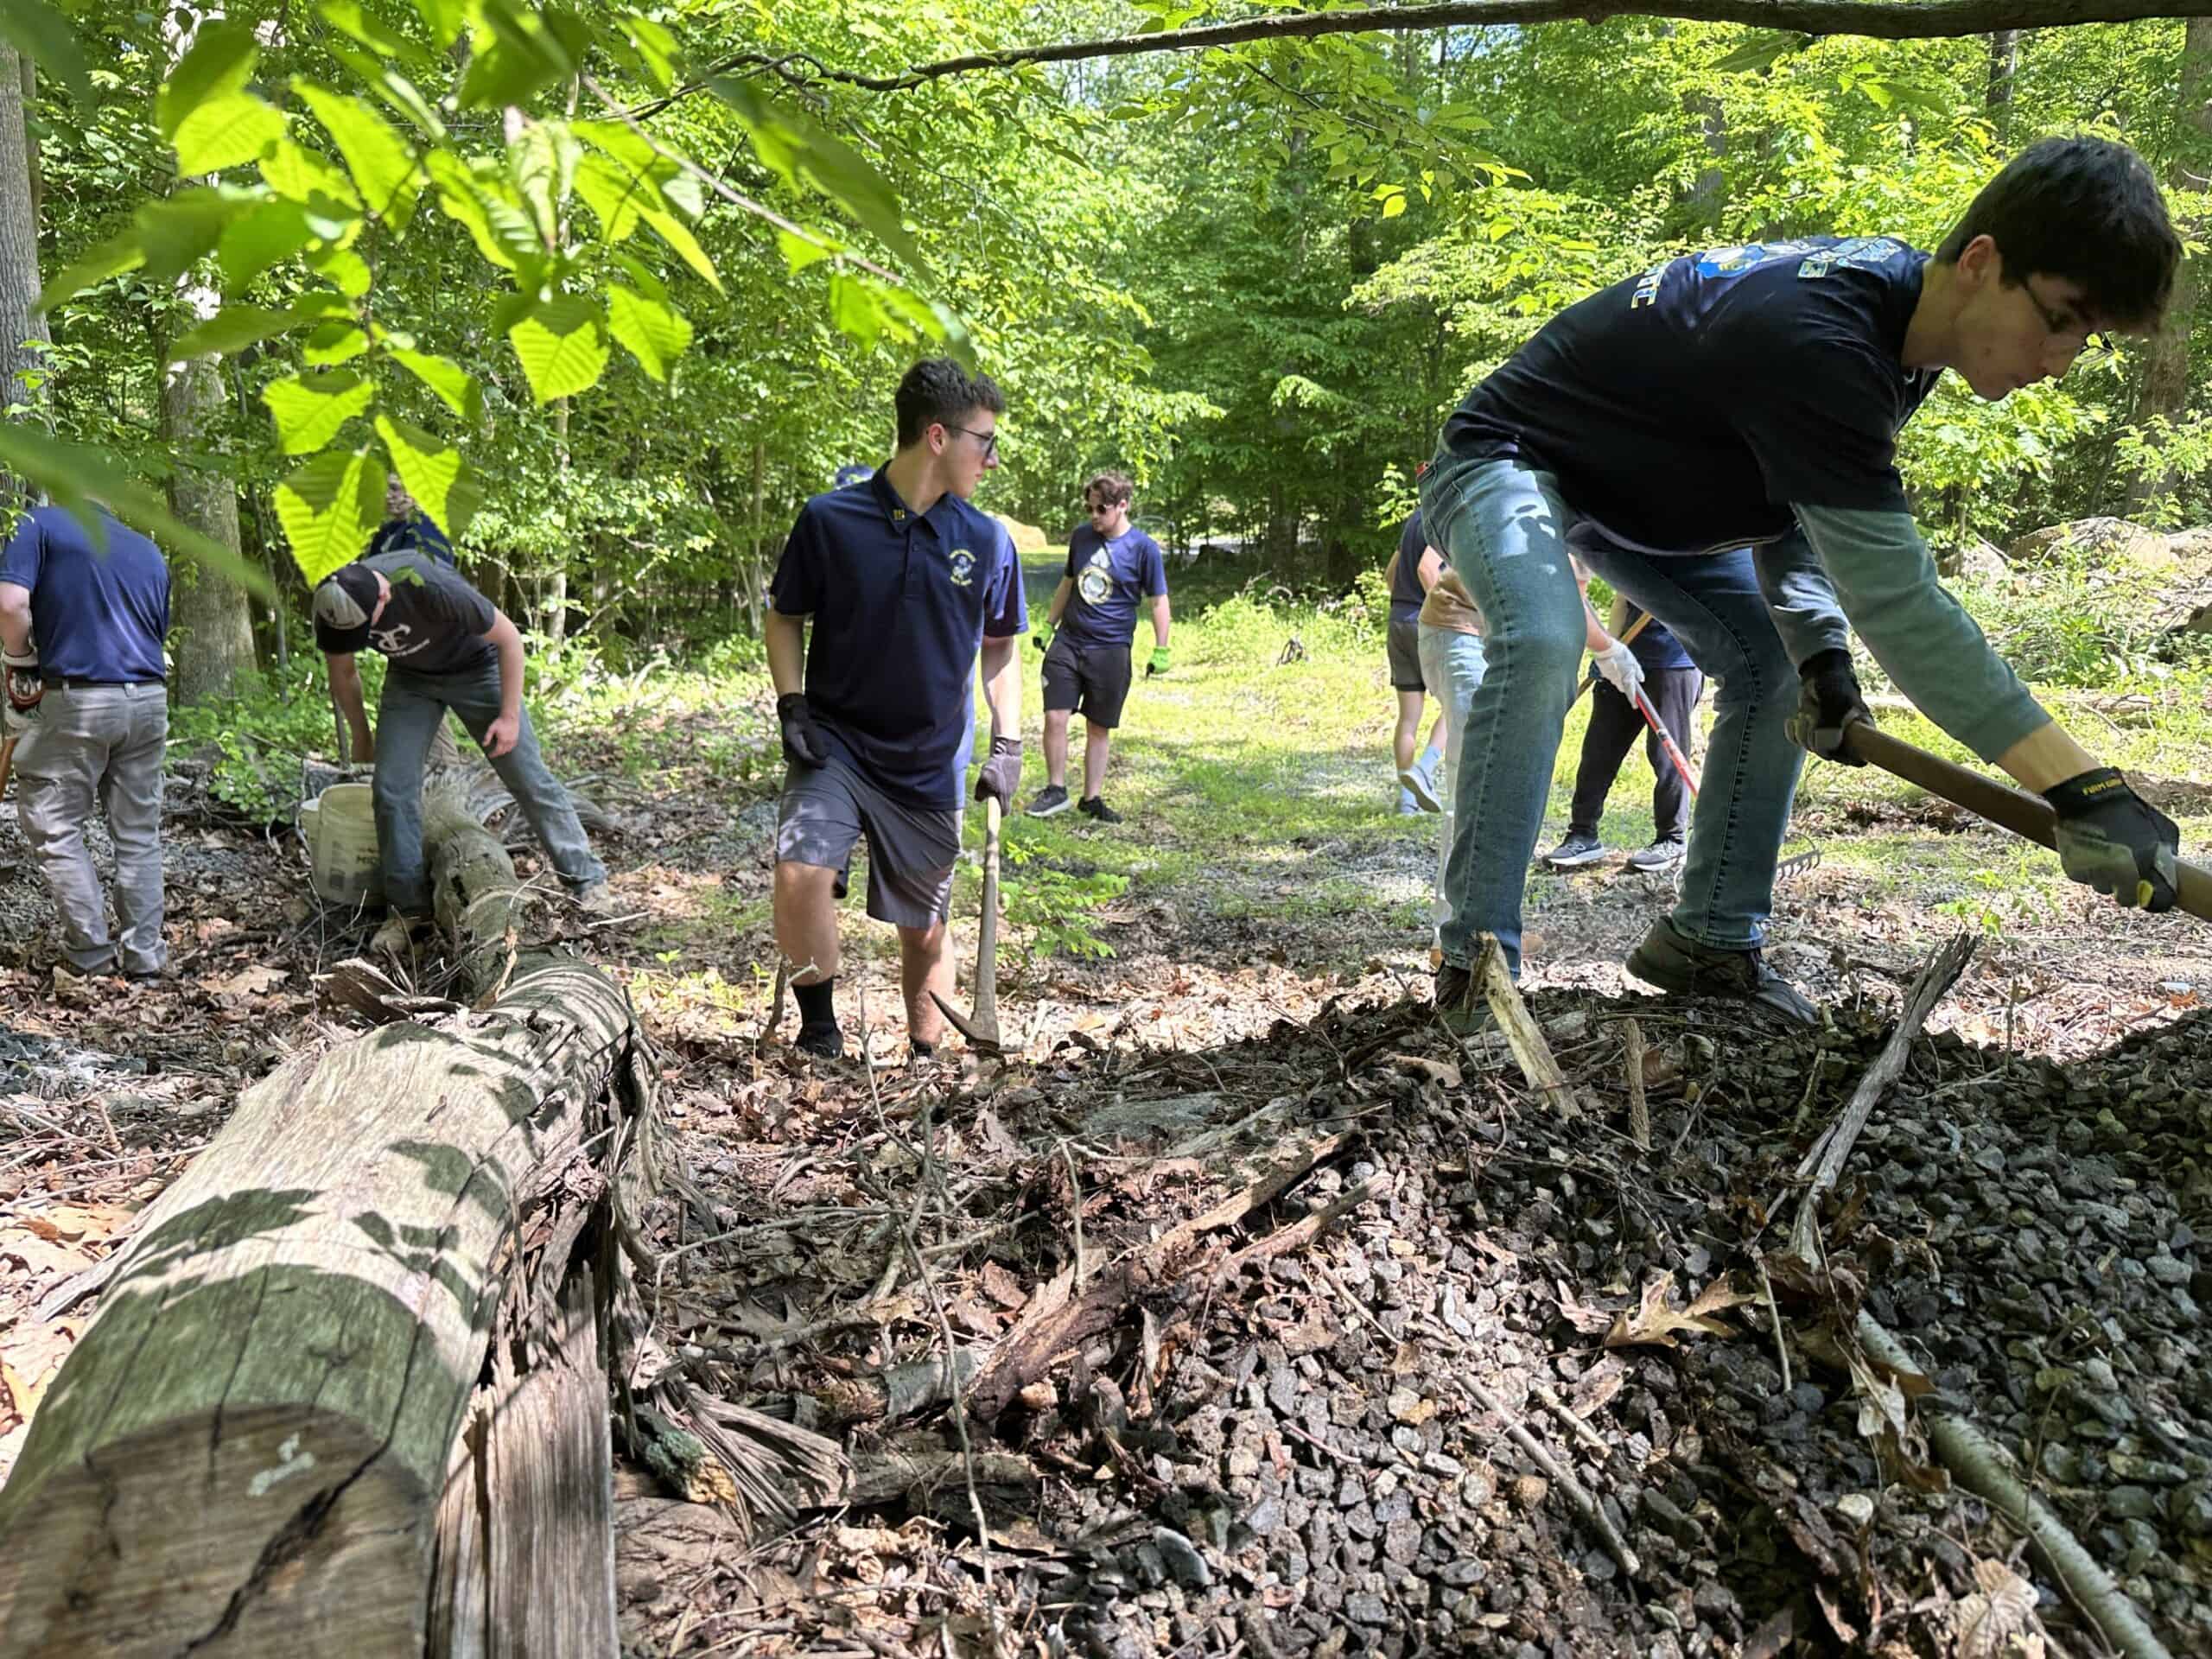 Owen J. Roberts JROTC students with rakes and shovels moving gravel at Crow's Nest's Warwick Woods